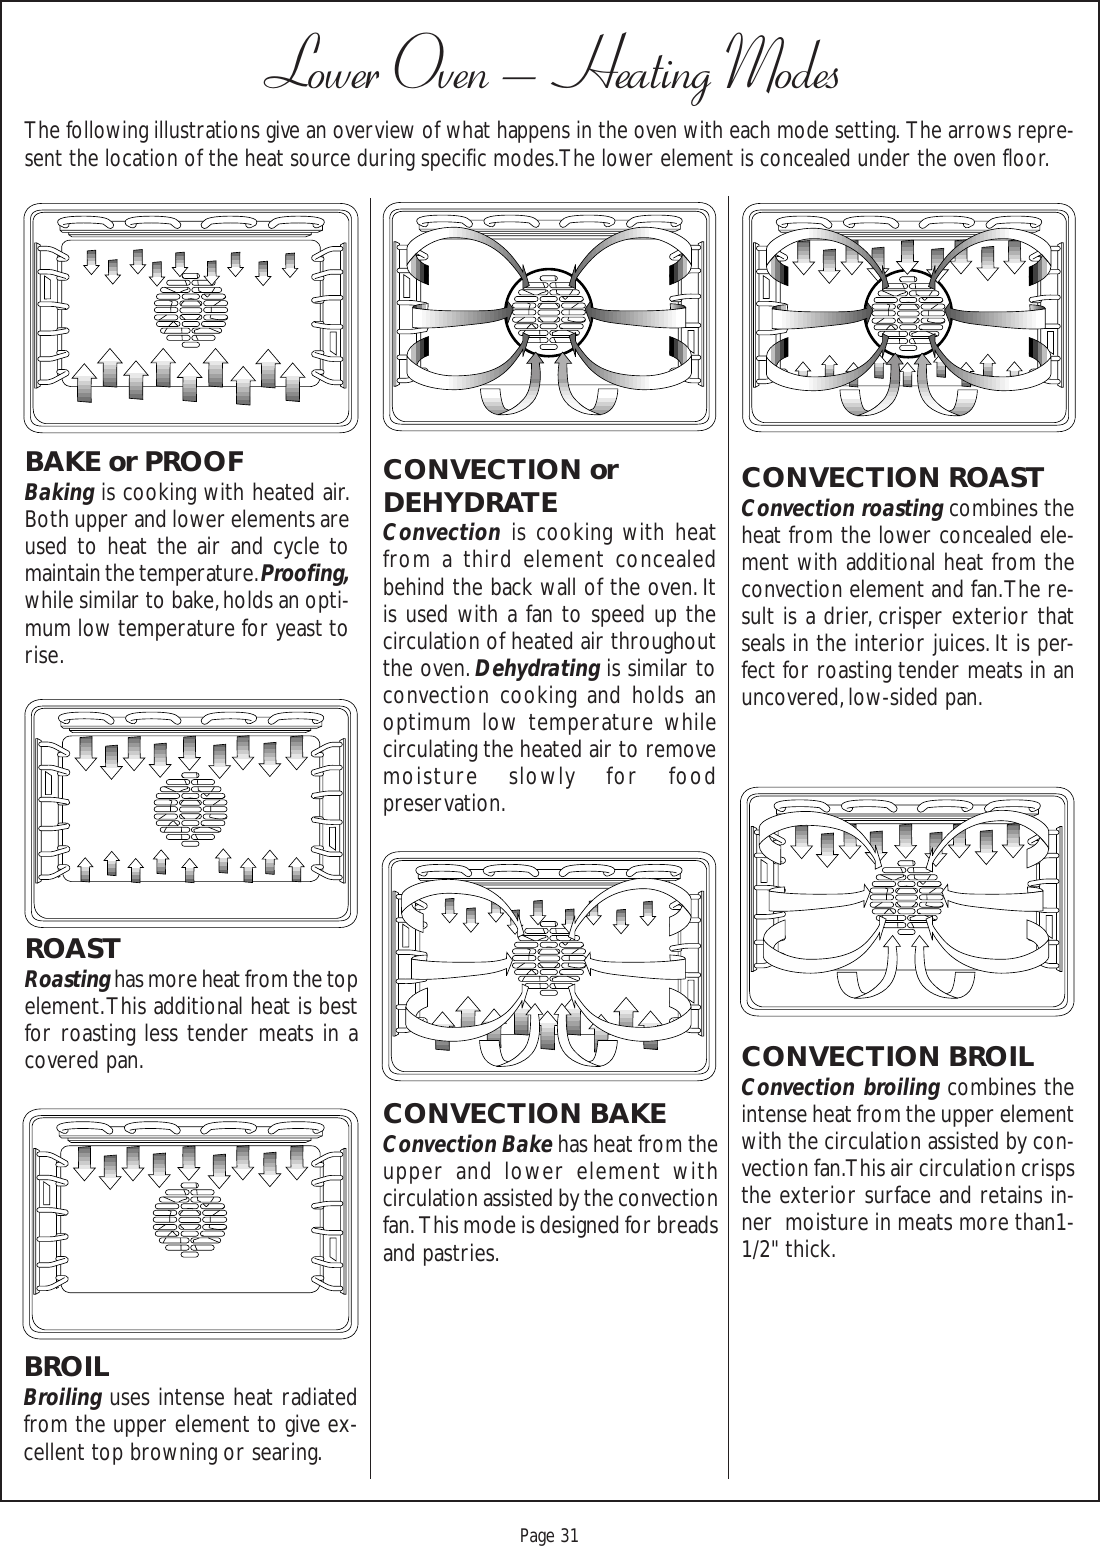 Proof 9-21-99Page 31Lower Oven – Heating ModesThe following illustrations give an overview of what happens in the oven with each mode setting.  The arrows repre-sent the location of the heat source during specific modes. The lower element is concealed under the oven floor.CONVECTION BROILConvection broiling combines theintense heat from the upper elementwith the circulation assisted by con-vection fan. This air circulation crispsthe exterior surface and retains in-ner  moisture in meats more than1-1/2&quot; thick.CONVECTION ROASTConvection roasting combines theheat from the lower concealed ele-ment with additional heat from theconvection element and fan. The re-sult is a drier, crisper exterior thatseals in the interior juices. It is per-fect for roasting tender meats in anuncovered, low-sided pan.CONVECTION BAKEConvection Bake has heat from theupper and lower element withcirculation assisted by the convectionfan.  This mode is designed for breadsand pastries.CONVECTION orDEHYDRATEConvection is cooking with heatfrom a third element concealedbehind the back wall of the oven. Itis used with a fan to speed up thecirculation of heated air throughoutthe oven. Dehydrating is similar toconvection cooking and holds anoptimum low temperature whilecirculating the heated air to removemoisture slowly for foodpreservation.BROILBroiling uses intense heat radiatedfrom the upper element to give ex-cellent top browning or searing.ROASTRoasting has more heat from the topelement. This additional heat is bestfor roasting less tender meats in acovered pan.BAKE or PROOFBaking is cooking with heated air.Both upper and lower elements areused to heat the air and cycle tomaintain the temperature. Proofing,while similar to bake, holds an opti-mum low temperature for yeast torise.